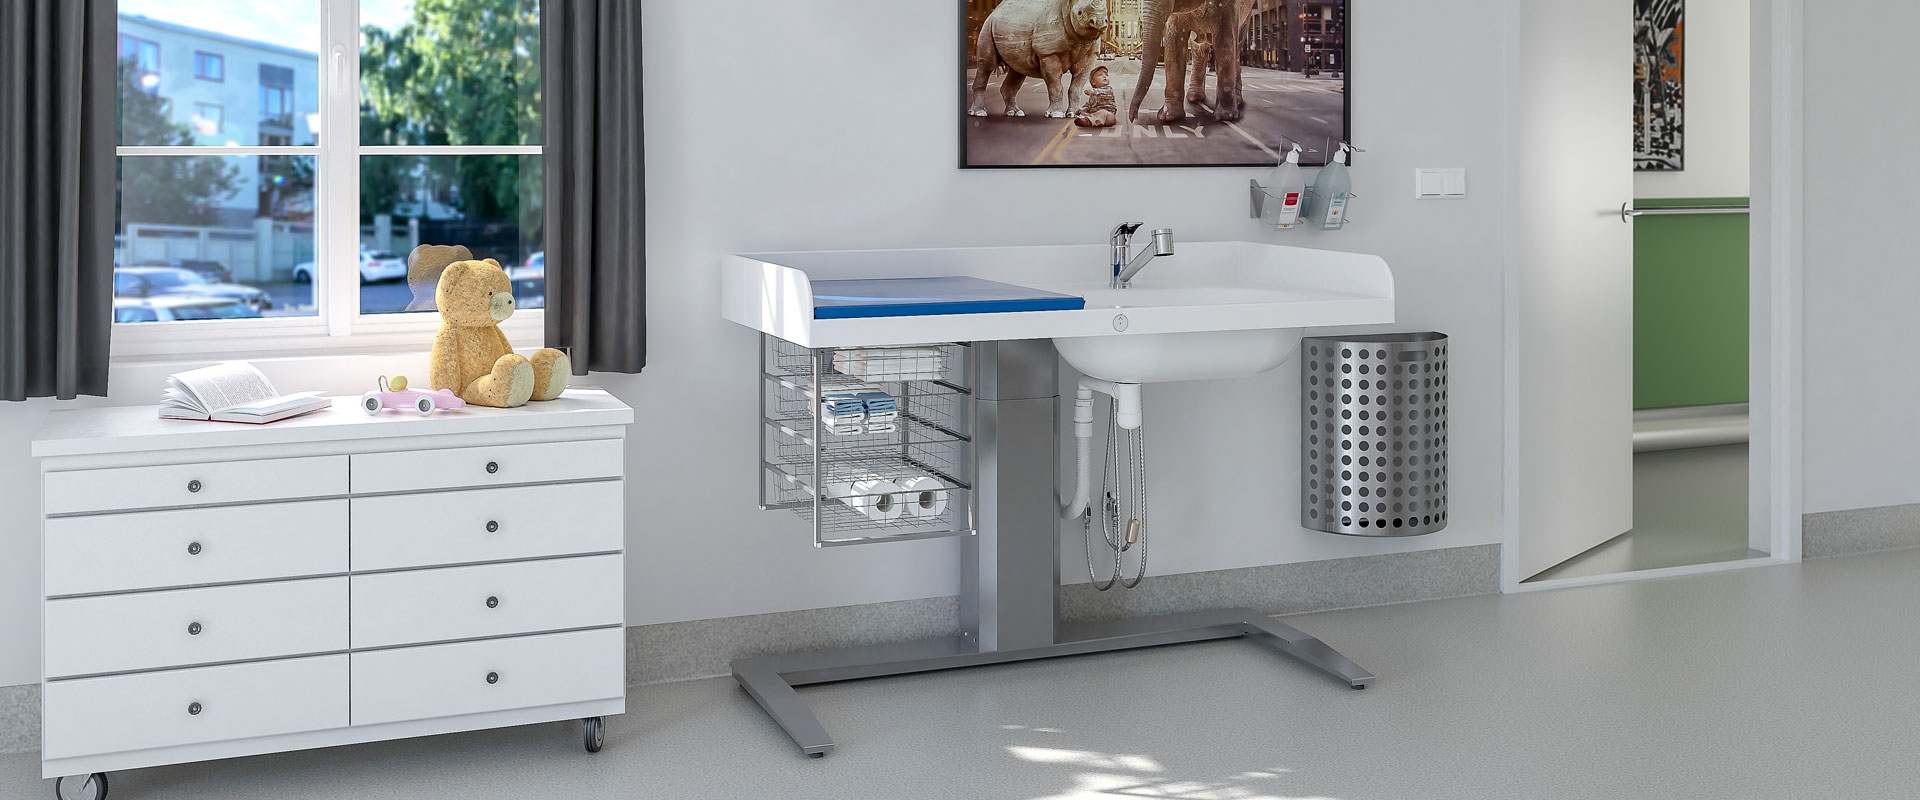 Height Adjustable Changing Table Granberg Care 343 - Bathtub